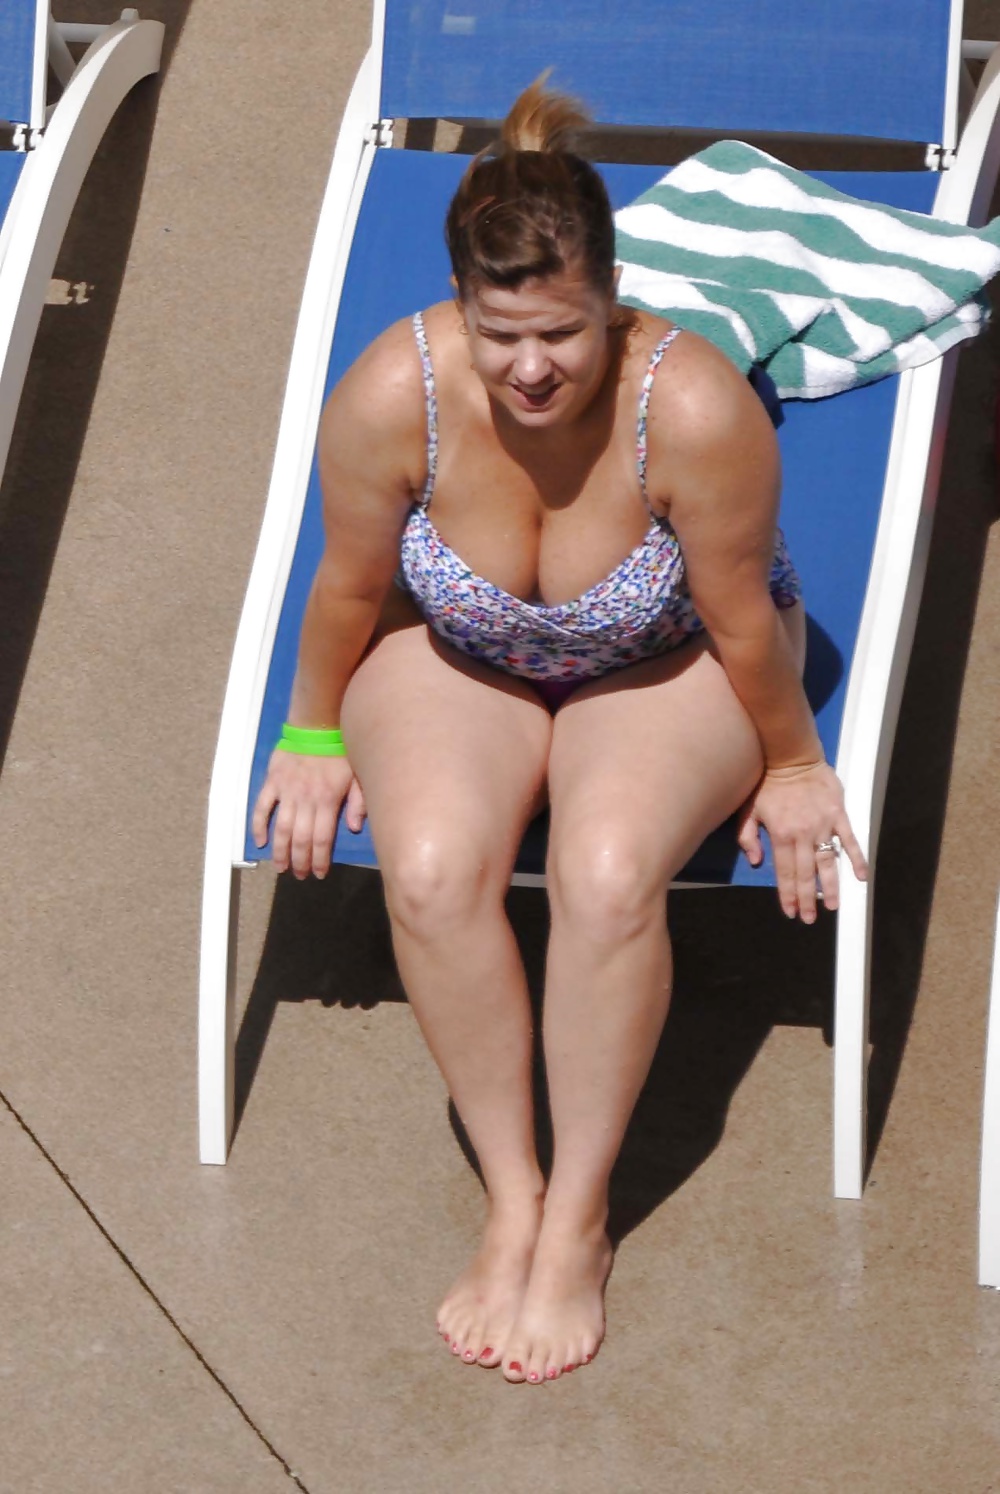 Candid MILF Mom Fat Tits Ass by Pool #39786566